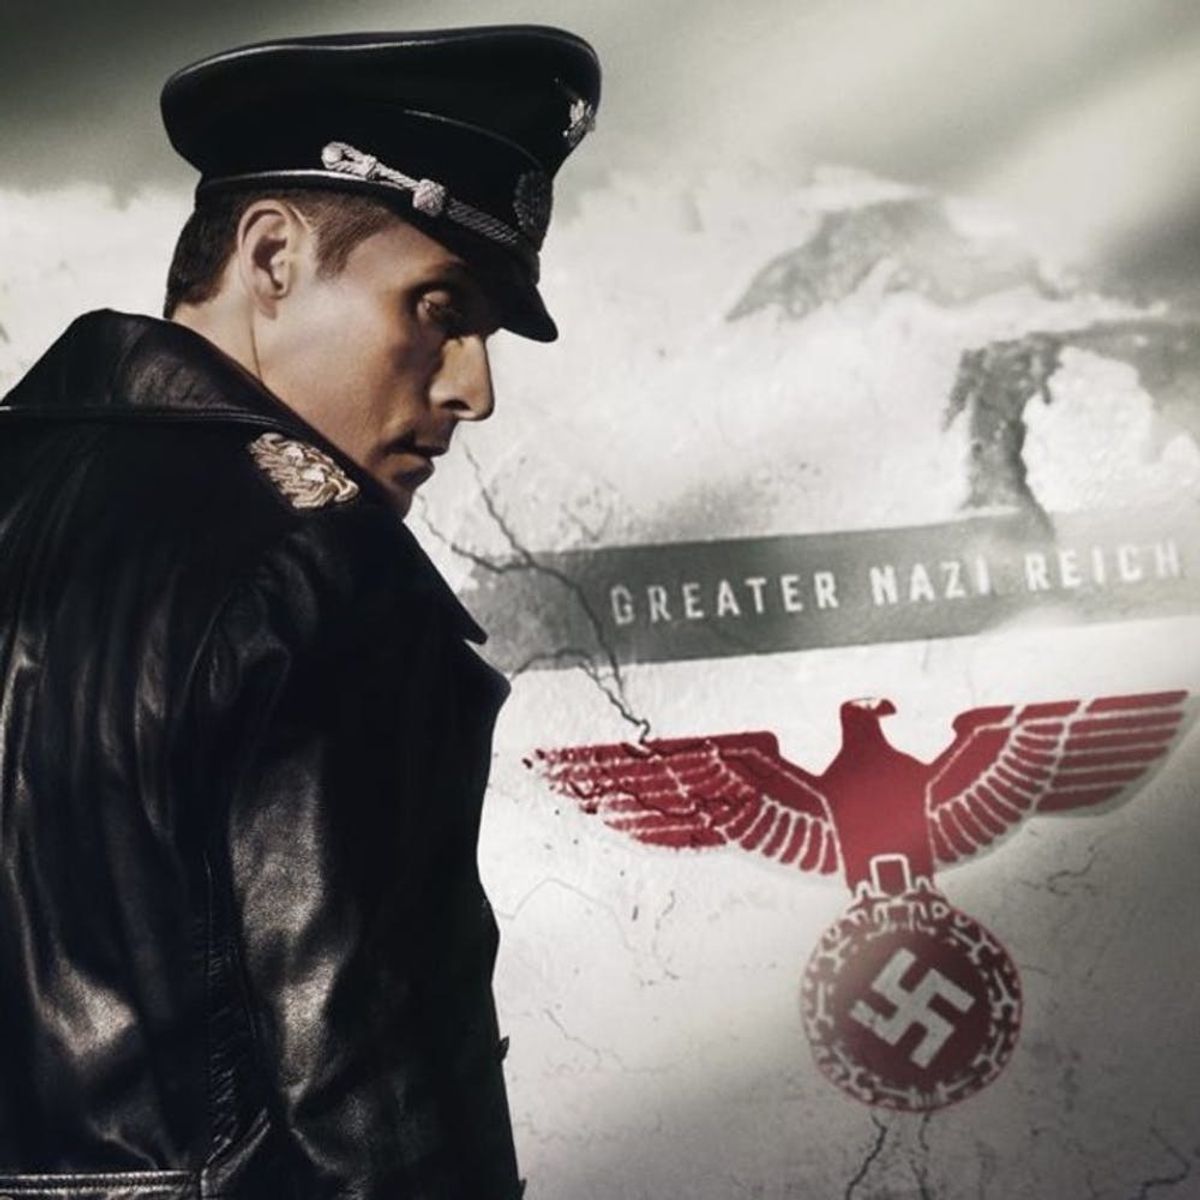 Watch These 4 Shows After Bingeing The Man in the High Castle